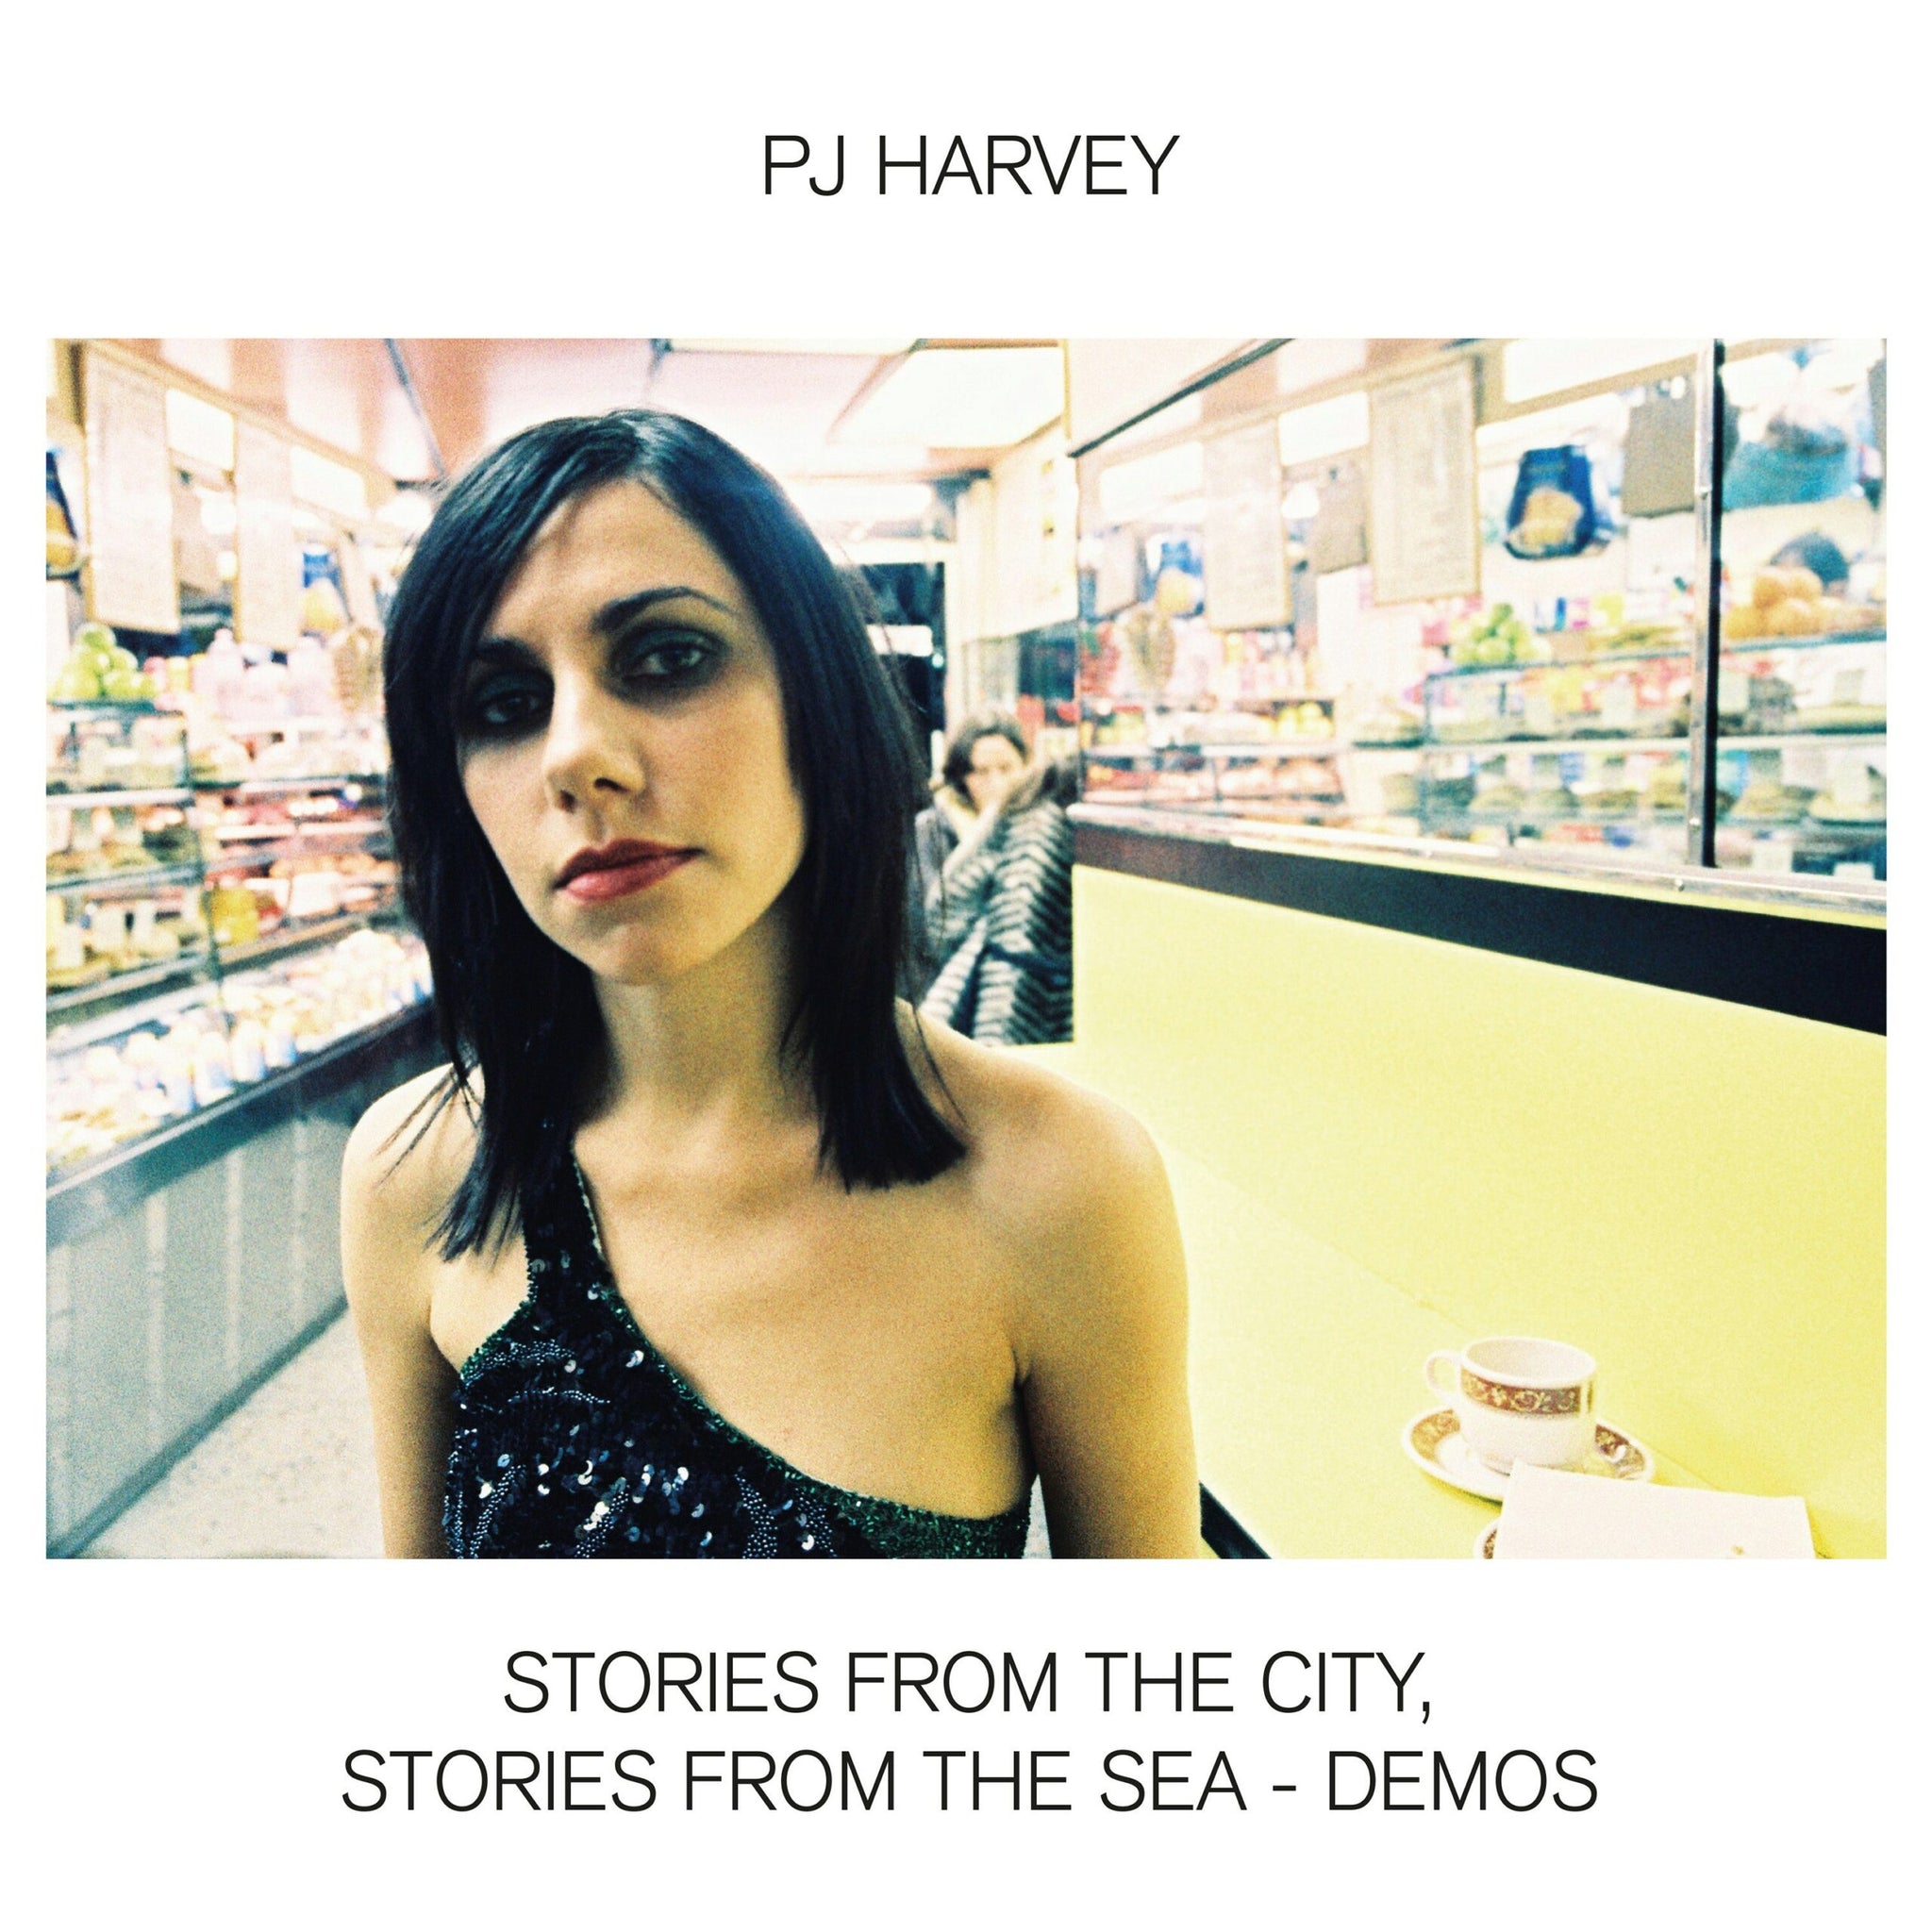 PJ HARVEY - Stories From The City, Stories From The Sea - Demos - CD